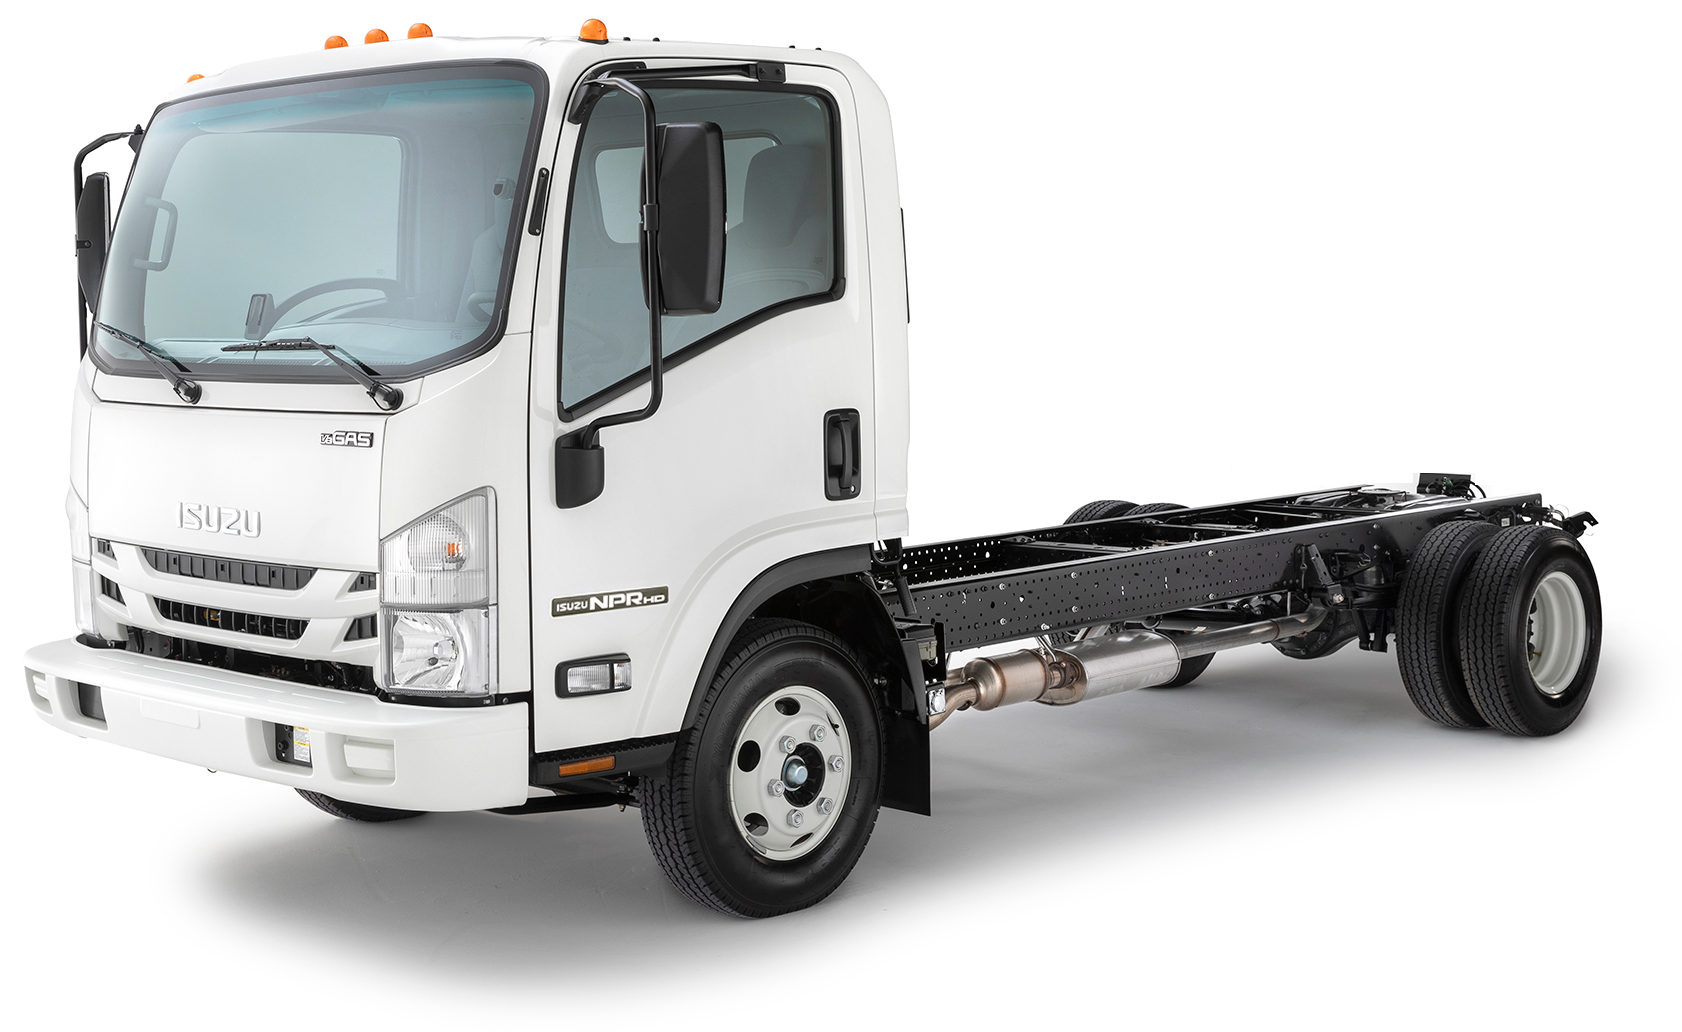 Home of Isuzu Commercial Vehicles. Low Cab Forward Trucks That Work As